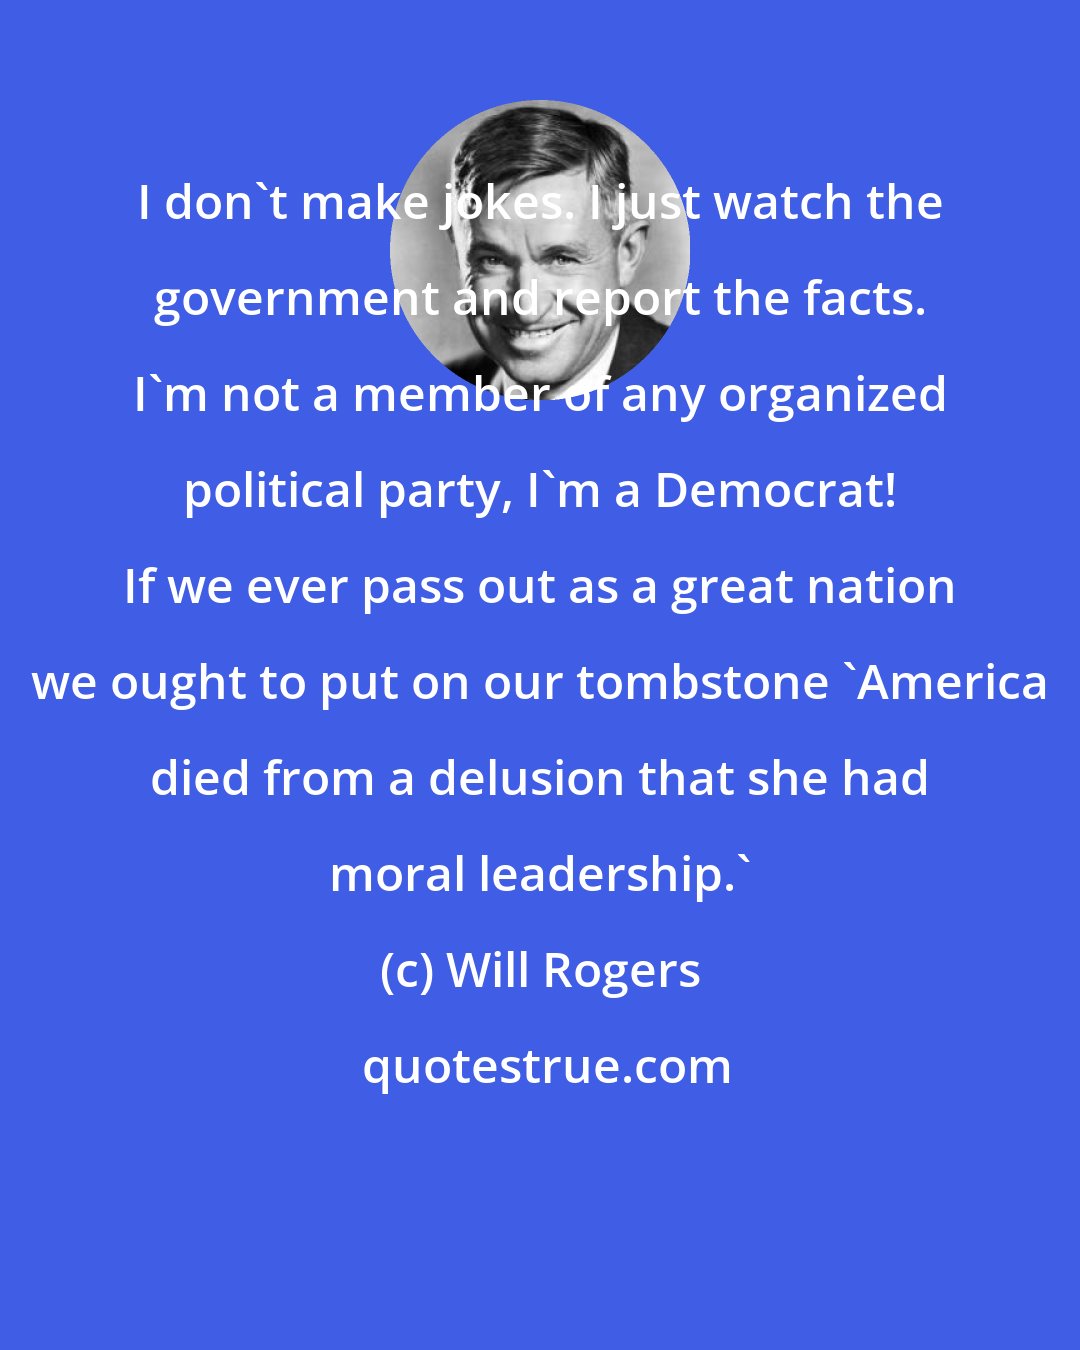 Will Rogers: I don't make jokes. I just watch the government and report the facts. I'm not a member of any organized political party, I'm a Democrat! If we ever pass out as a great nation we ought to put on our tombstone 'America died from a delusion that she had moral leadership.'